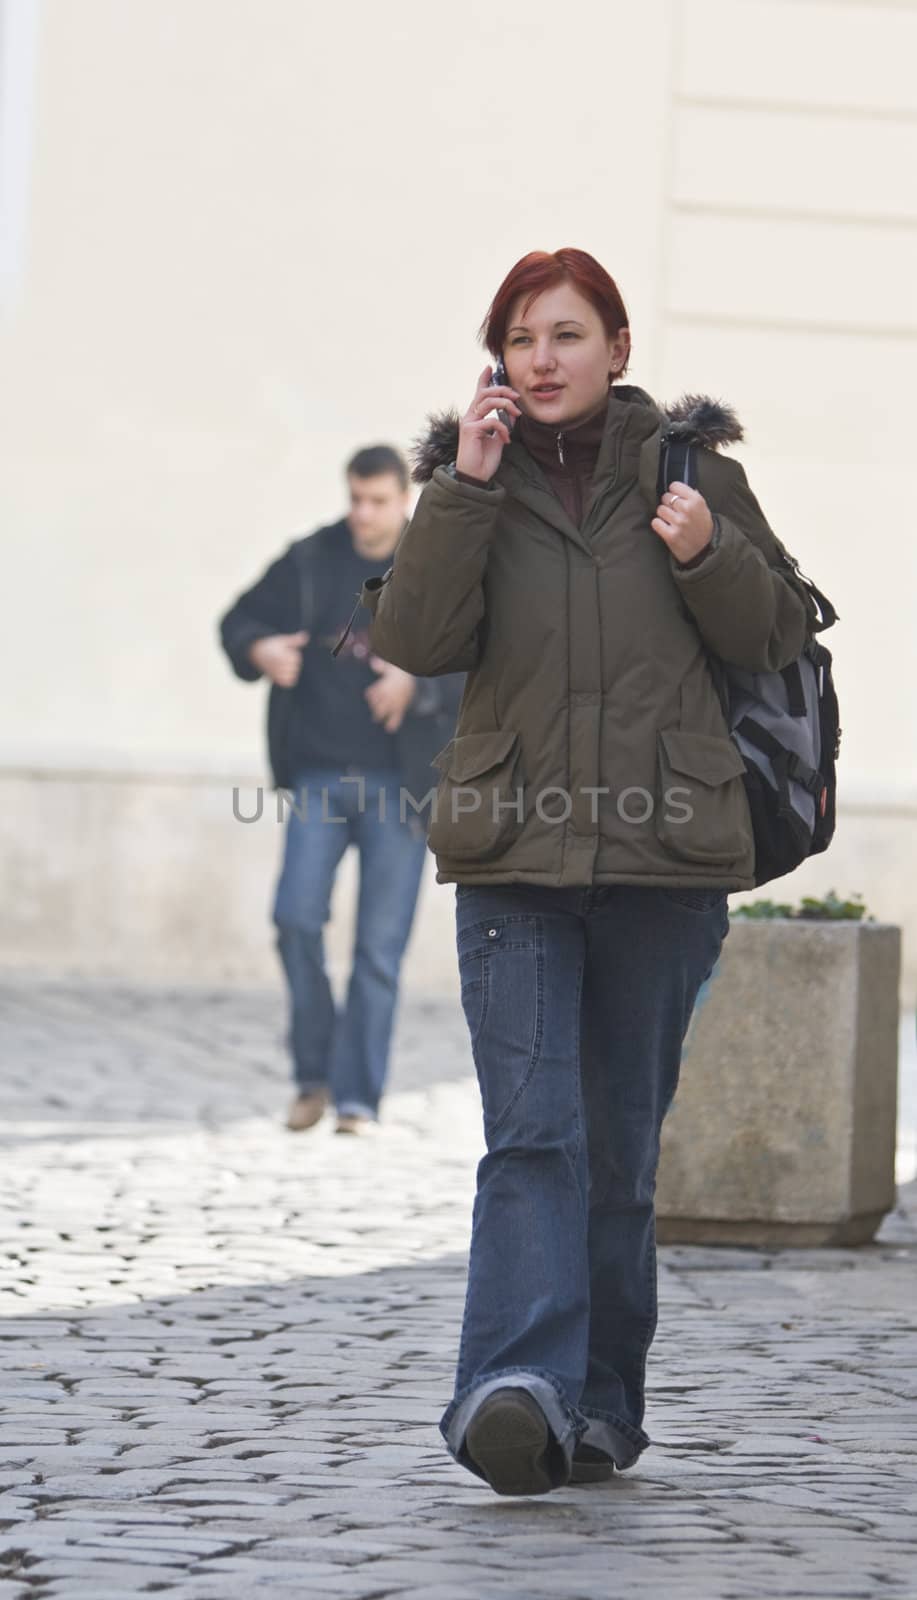 Redheaded girl student at the phone while is walking on a paved street.